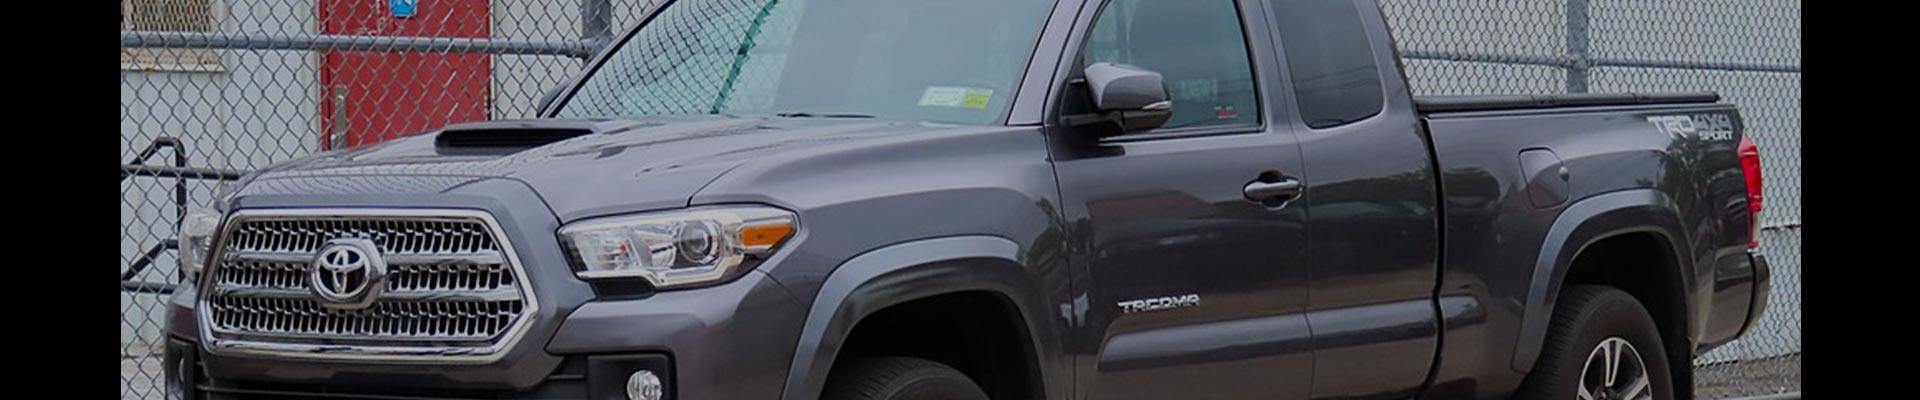 Shop Replacement and OEM 2015 Toyota Tacoma Parts with Discounted Price on the Net